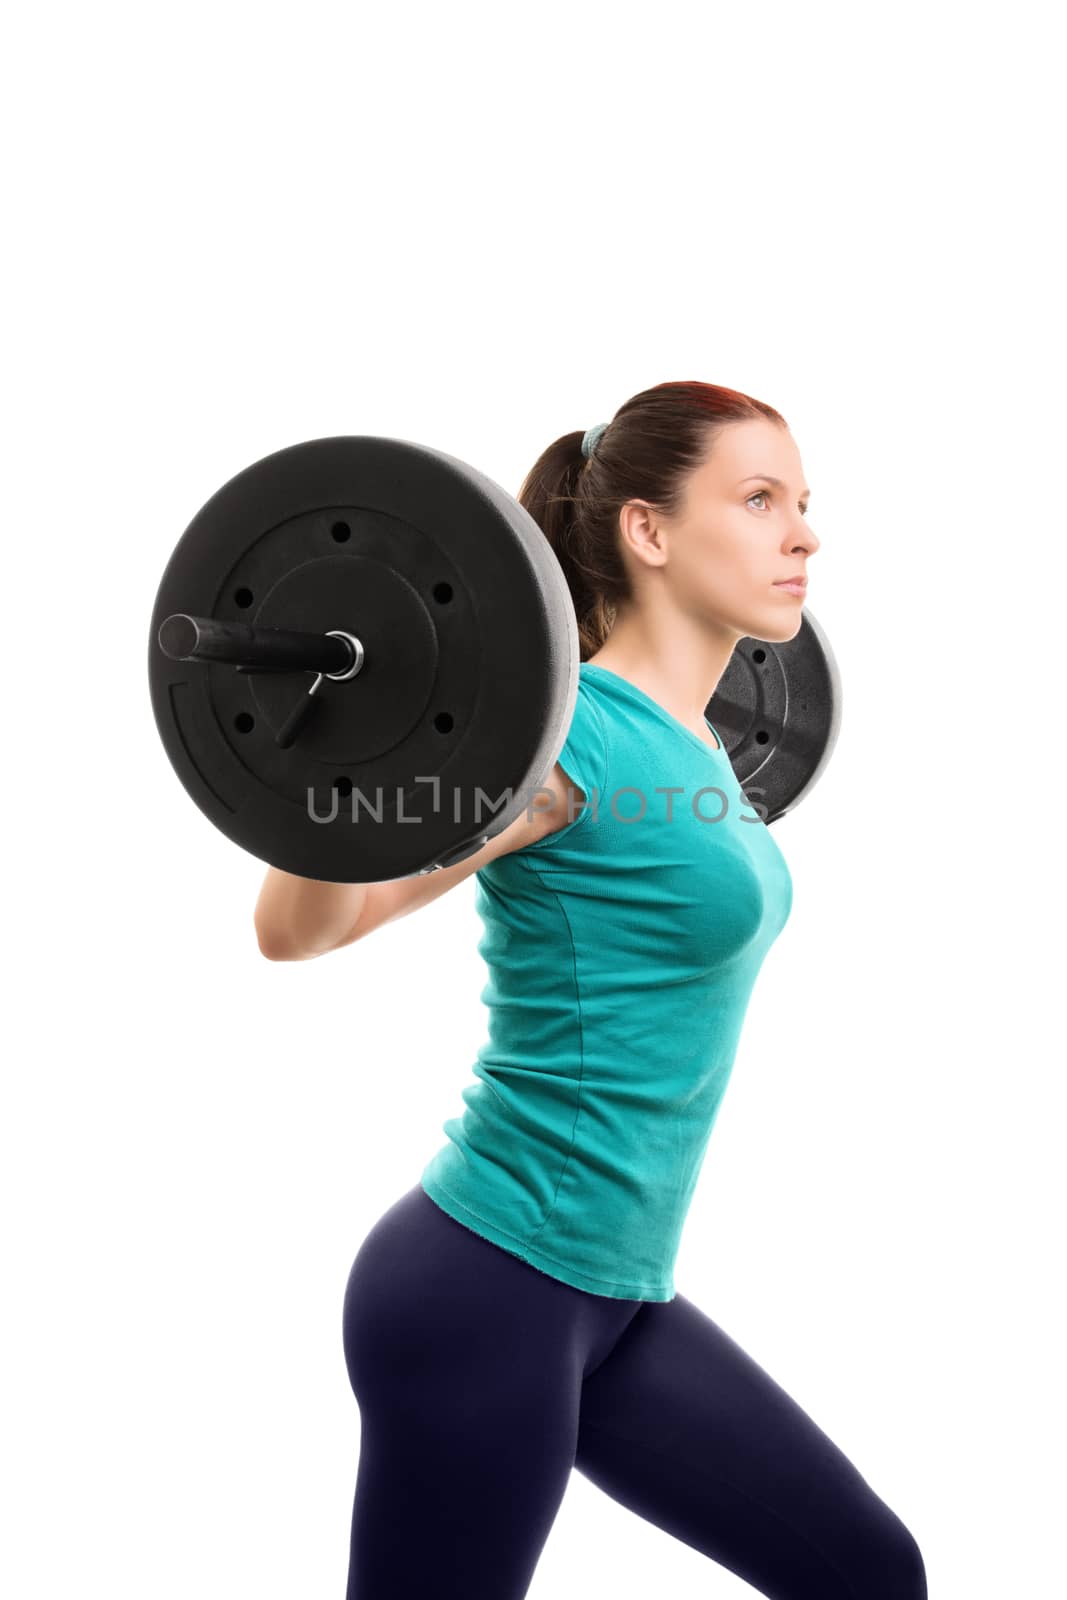 Young girl lifting weights by Mendelex